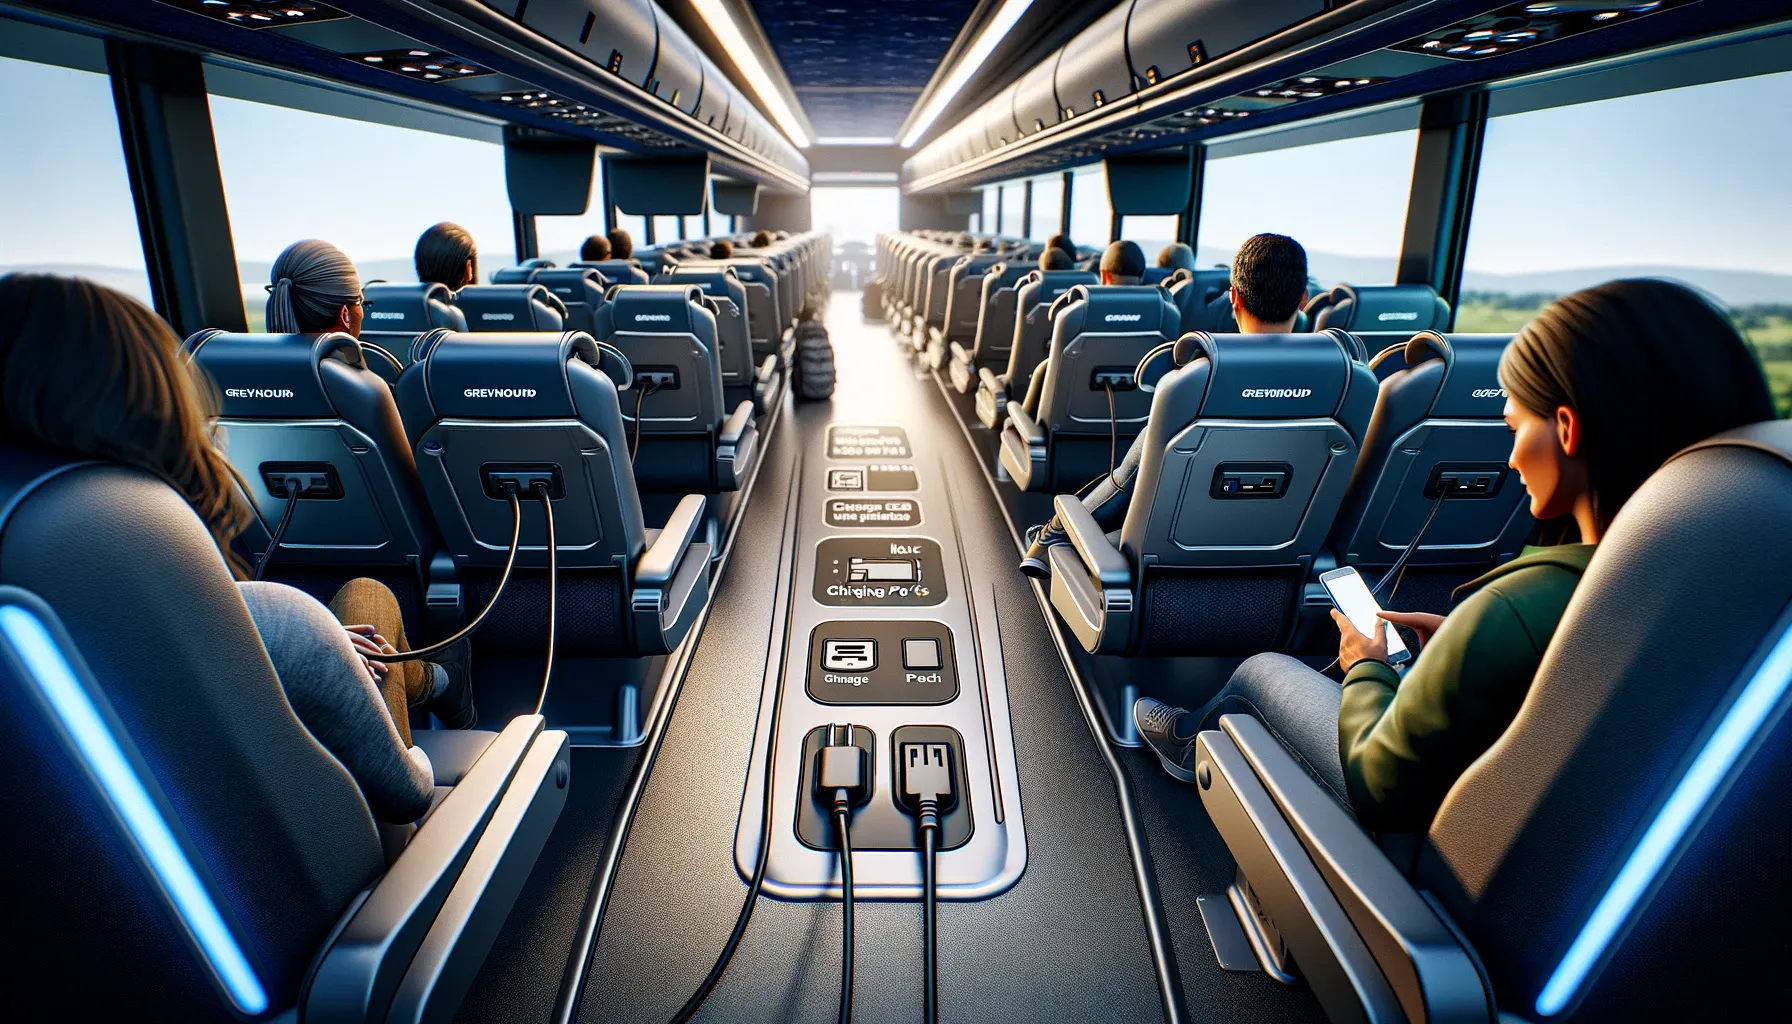 Do Greyhound buses have charging Ports